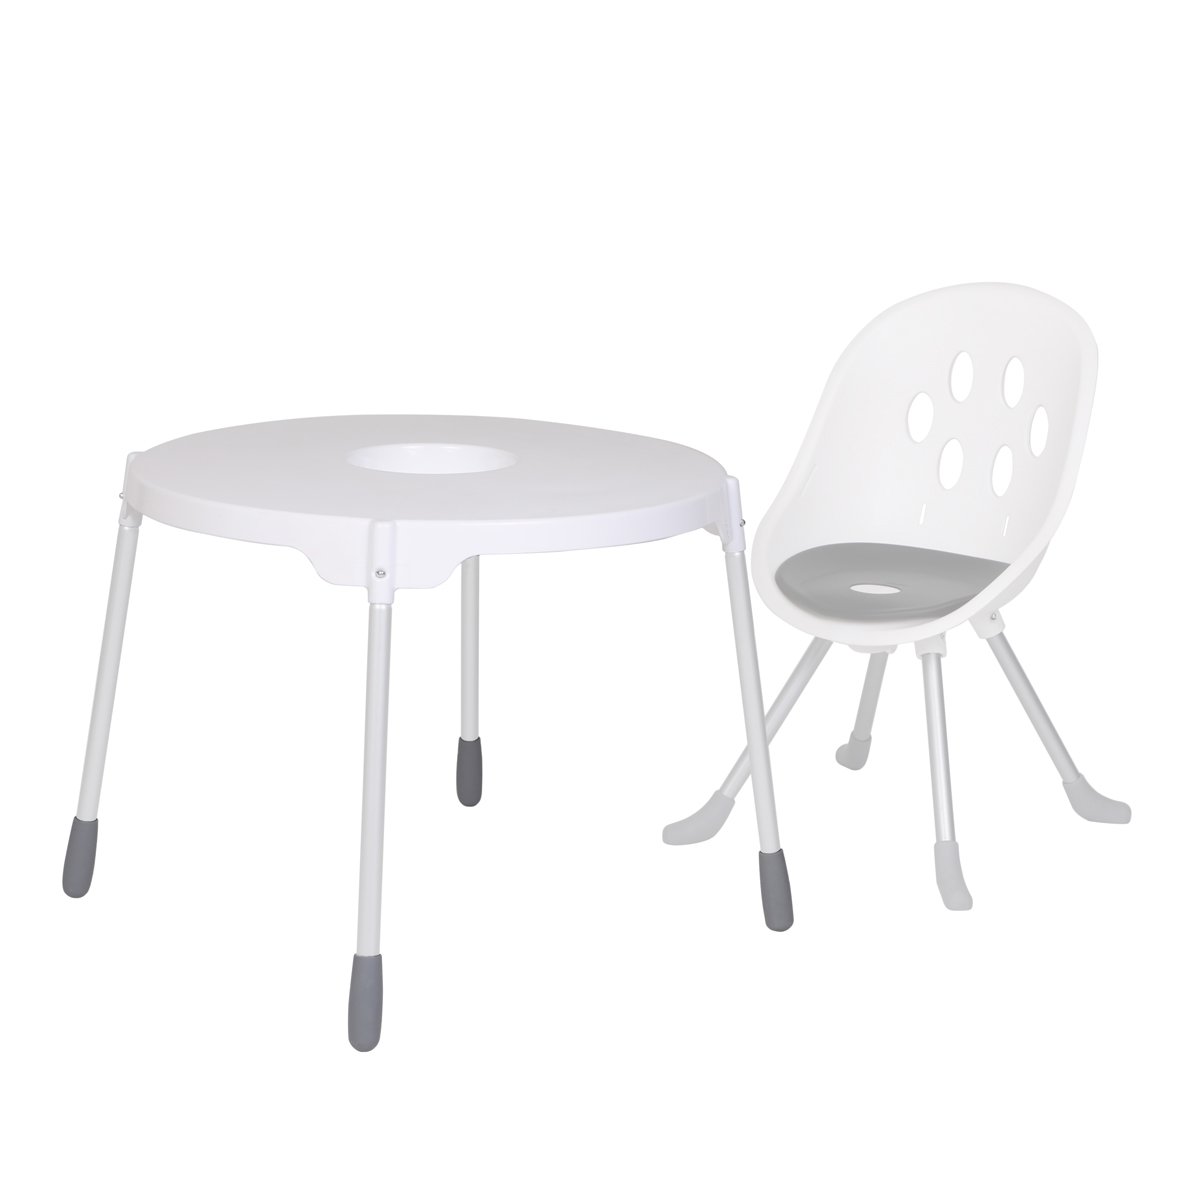 https://cdn.accentuate.io/4560618717218/19437753335986/phil_and_teds_poppy_table_top_with_leg_set_and_poppy_high_chair_1-v1630984522984.jpg?1200x1200